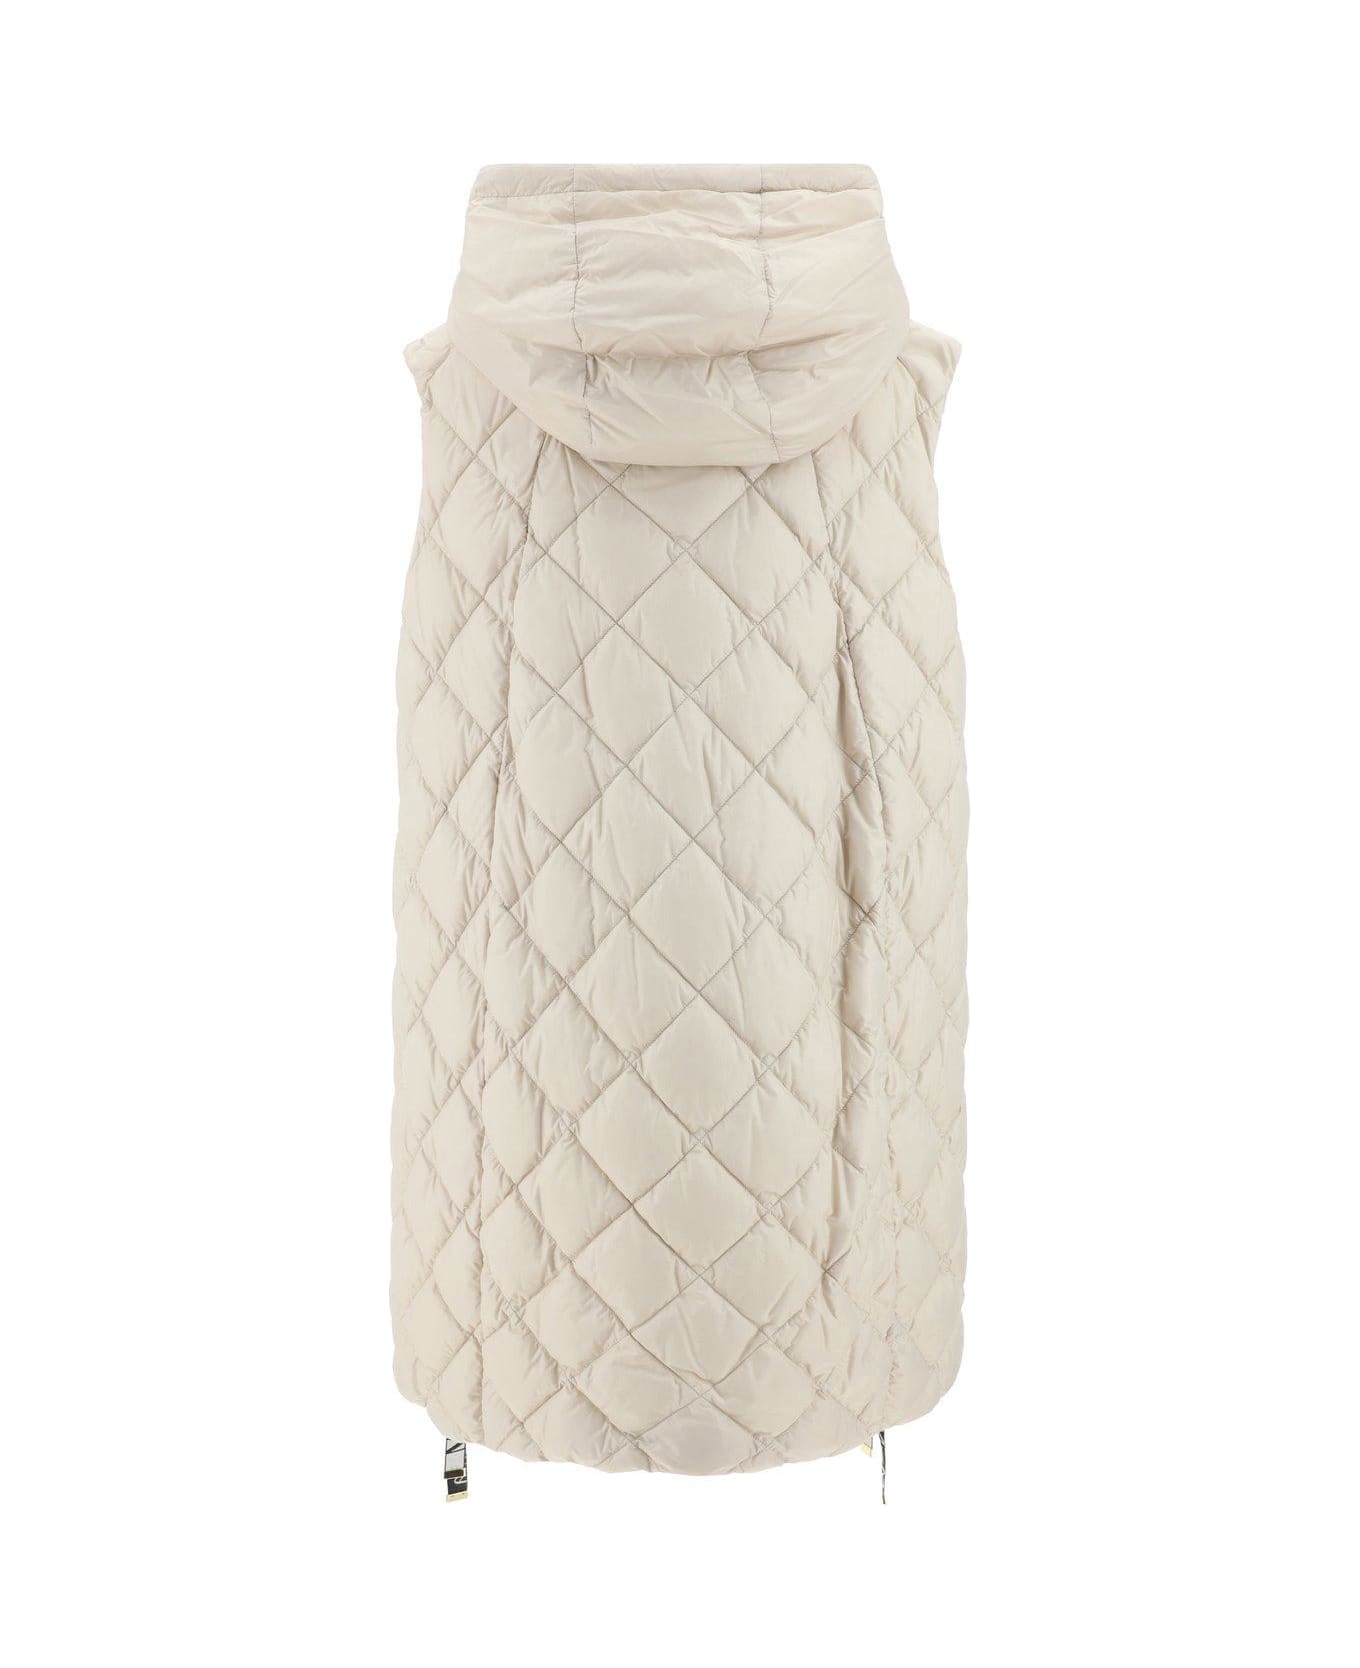 Max Mara The Cube Quilted Down Vest - Sabbia